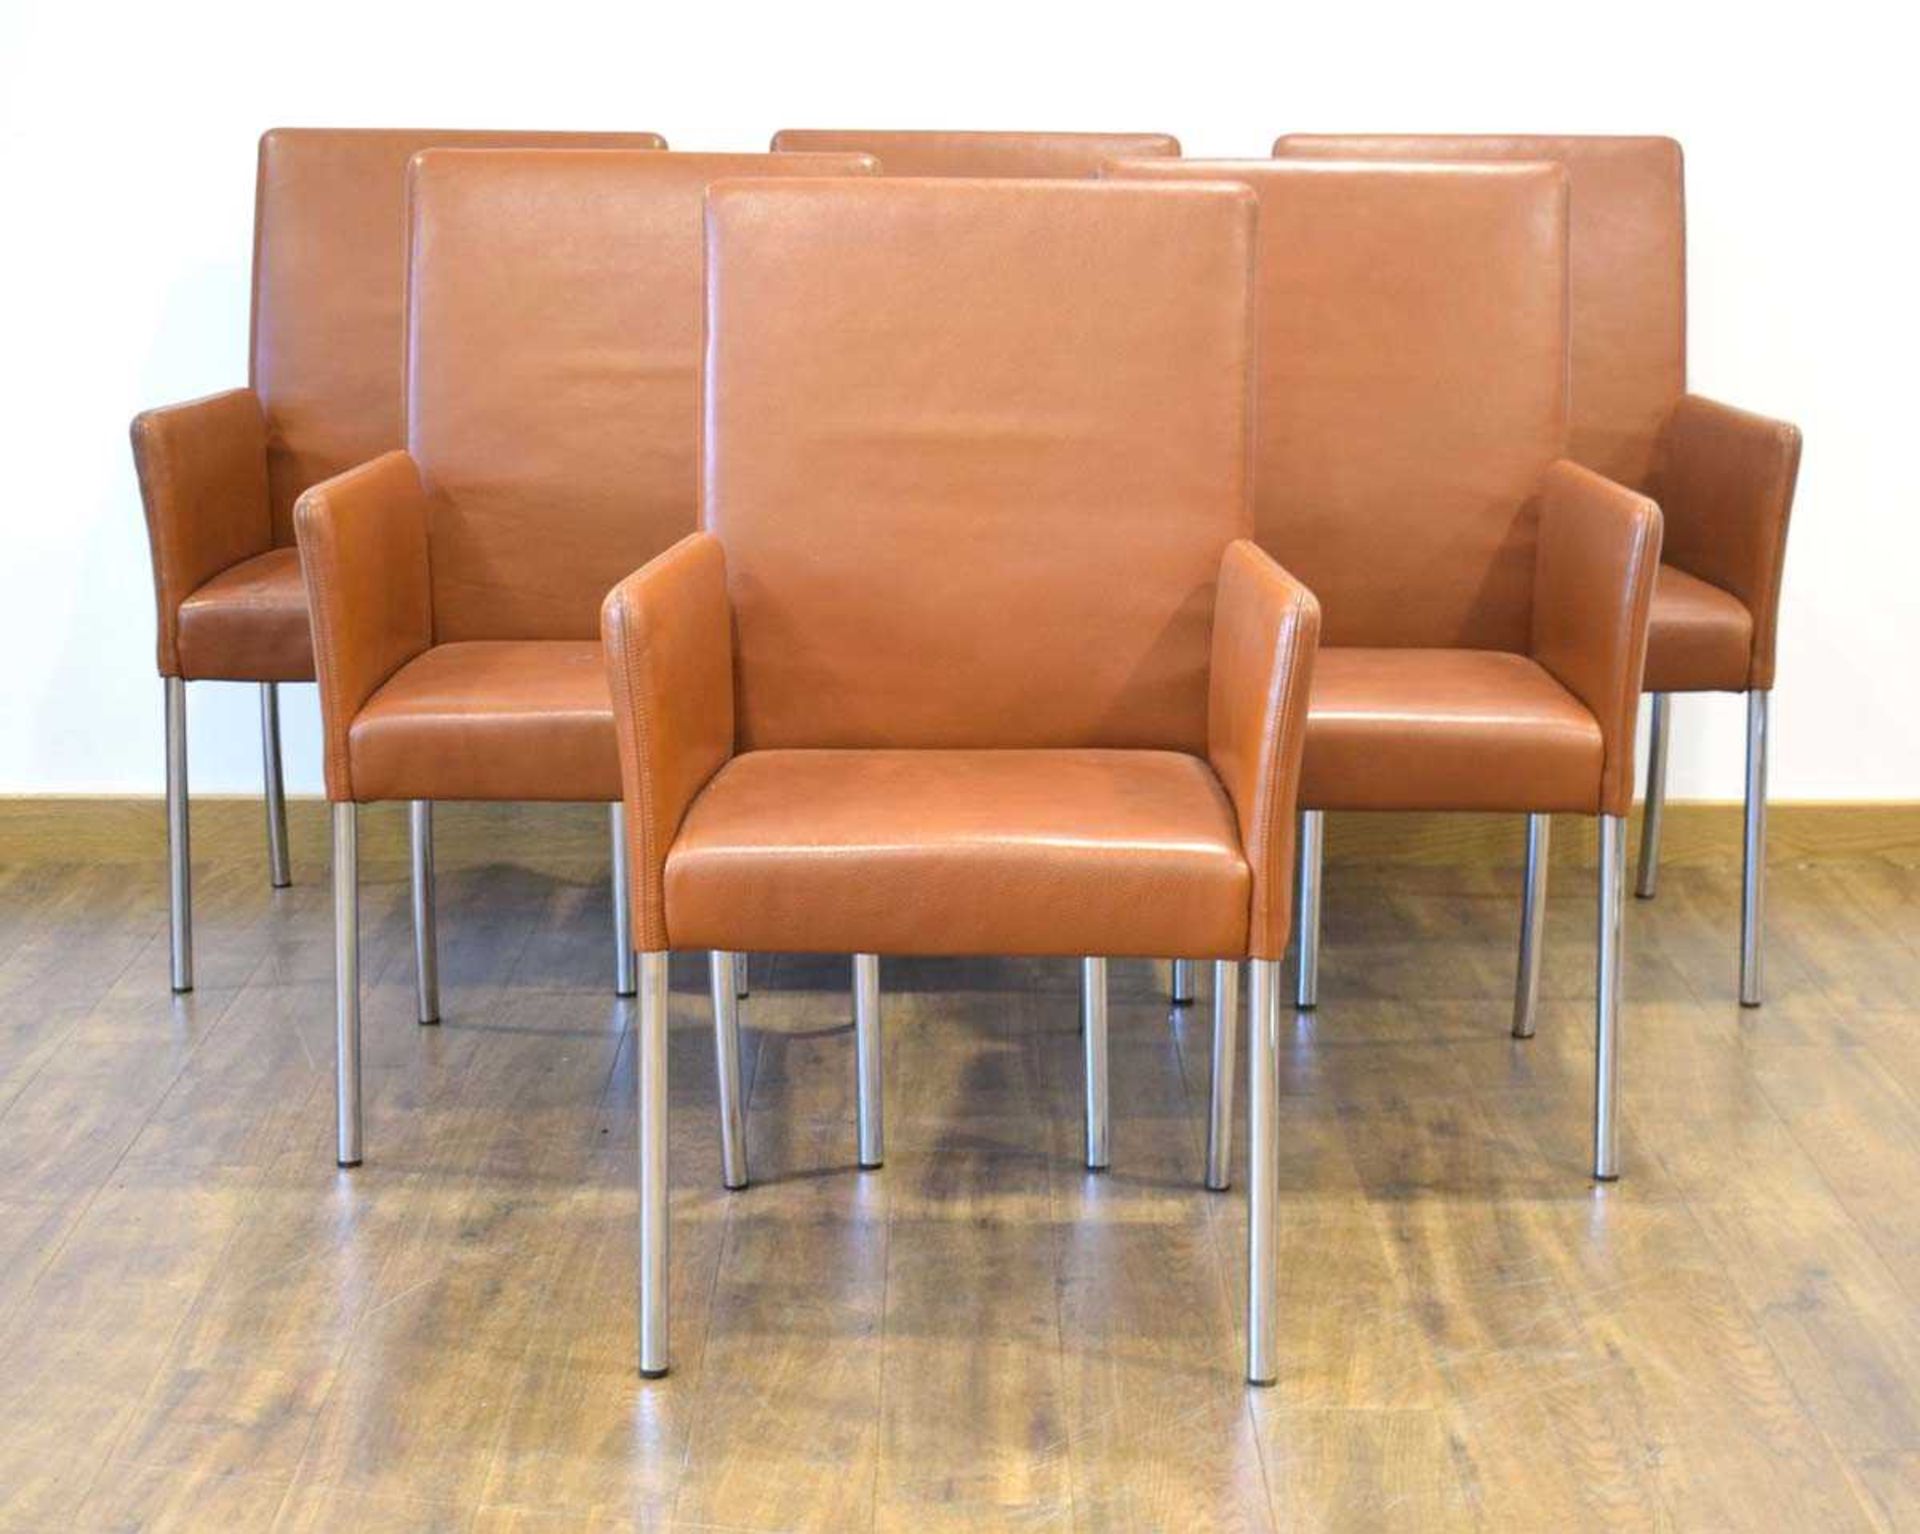 EOOS for Walter Knoll, a set of six 'Jason' highback chairs in pale brown leather *Sold subject to